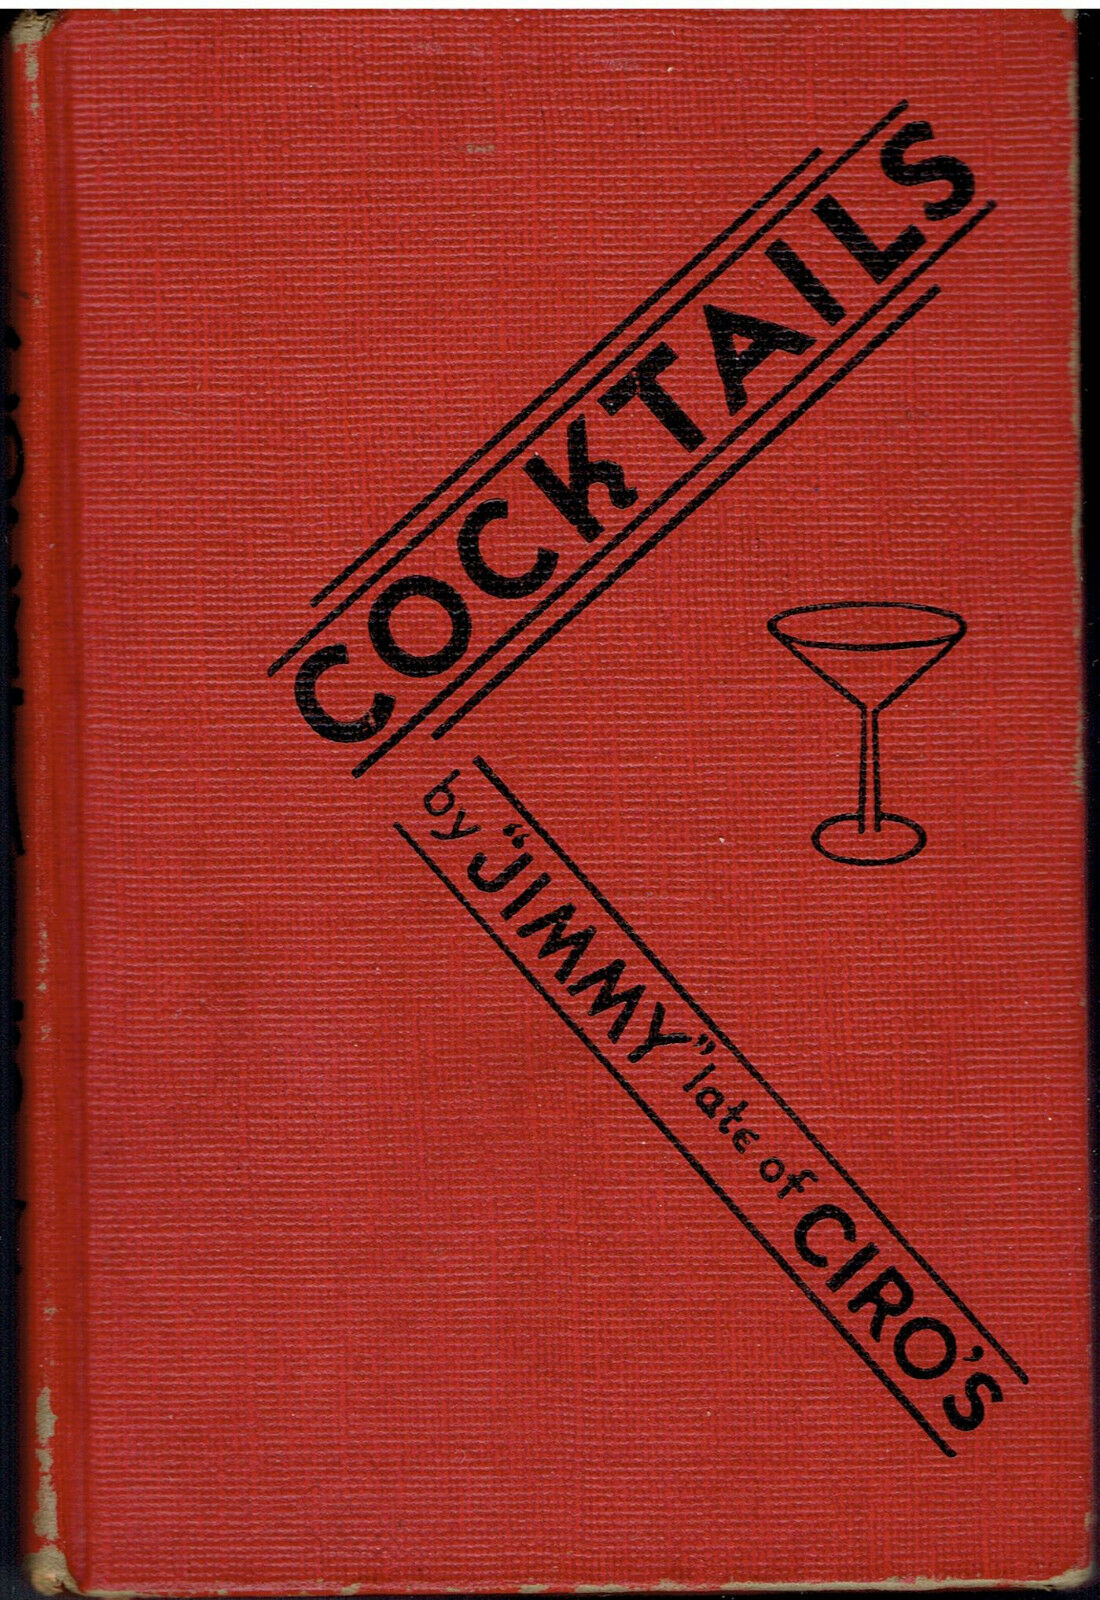 Cocktails By Jimmy Late Of Ciro's London 1930 Rare